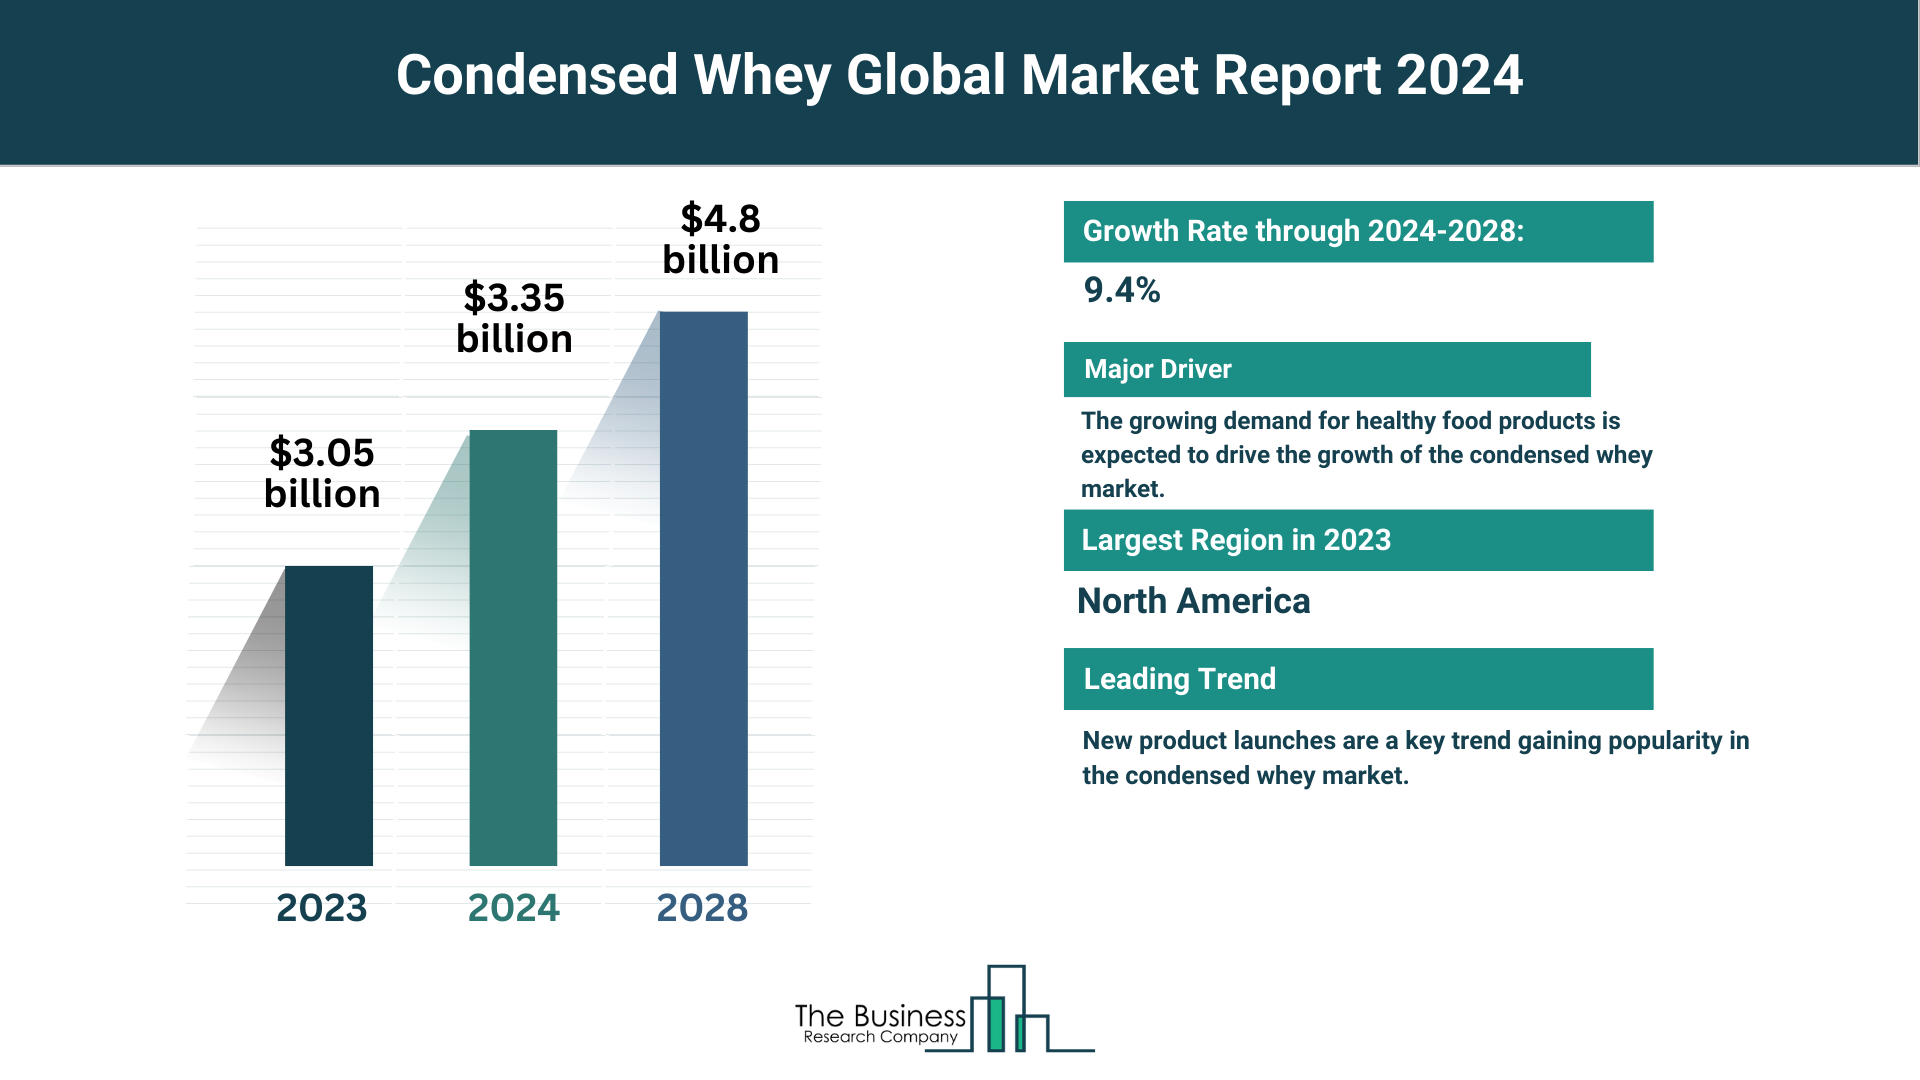 Global Condensed Whey Market Overview 2024: Size, Drivers, And Trends